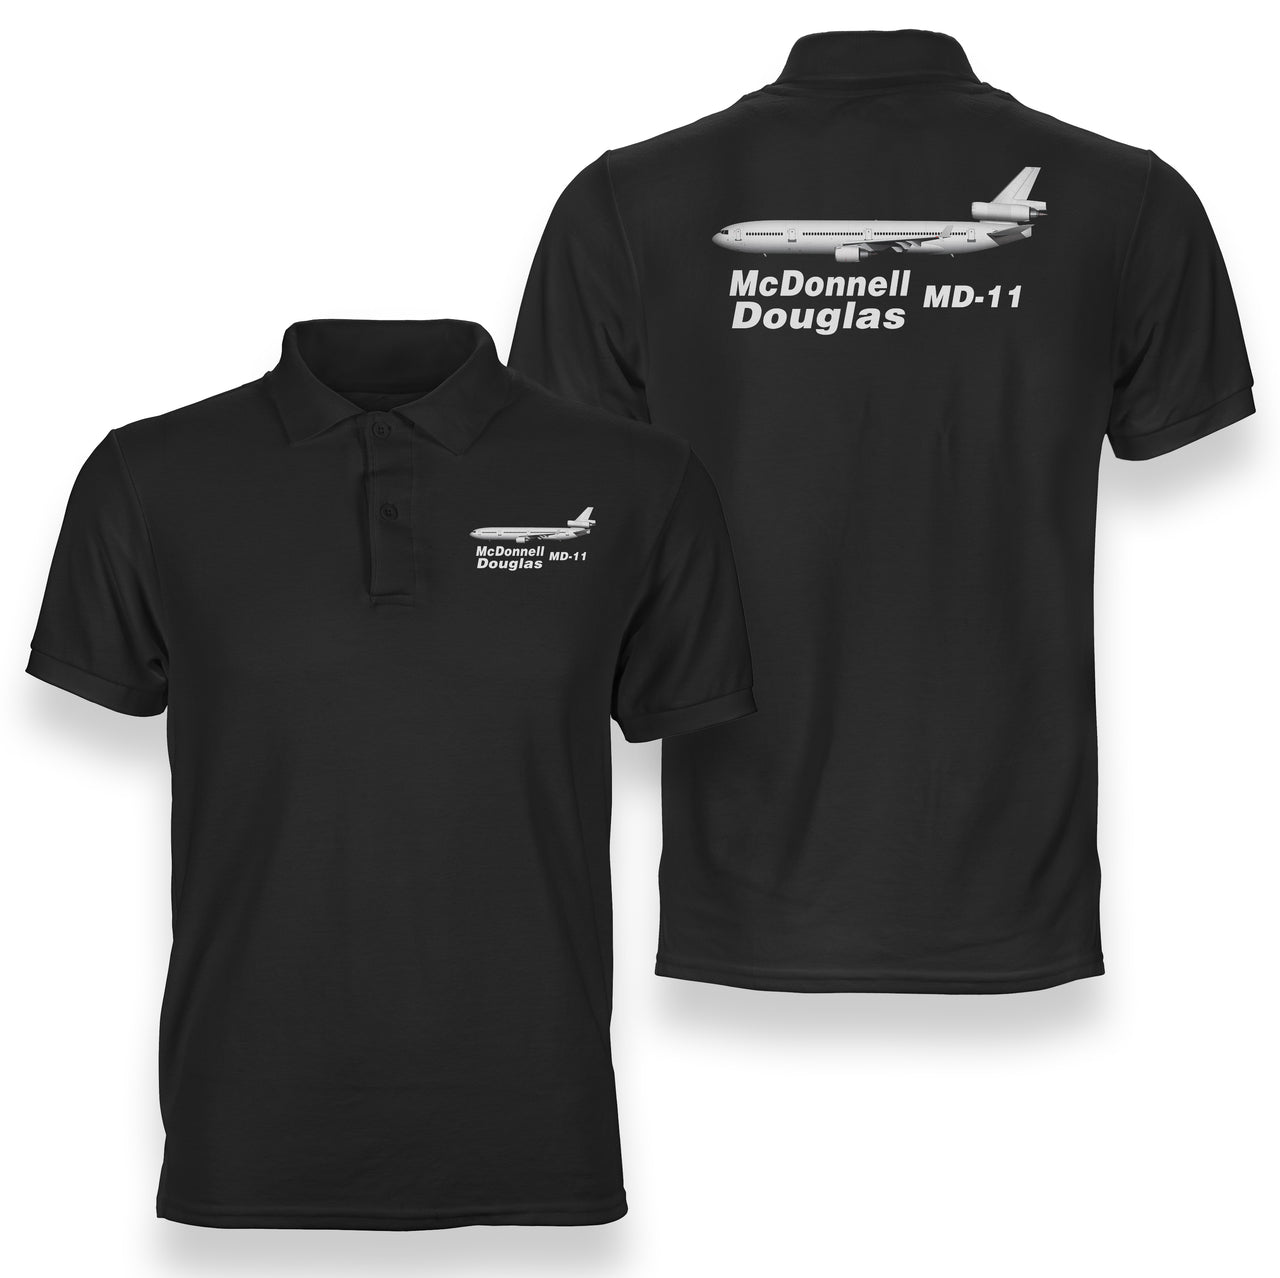 The McDonnell Douglas MD-11 Designed Double Side Polo T-Shirts